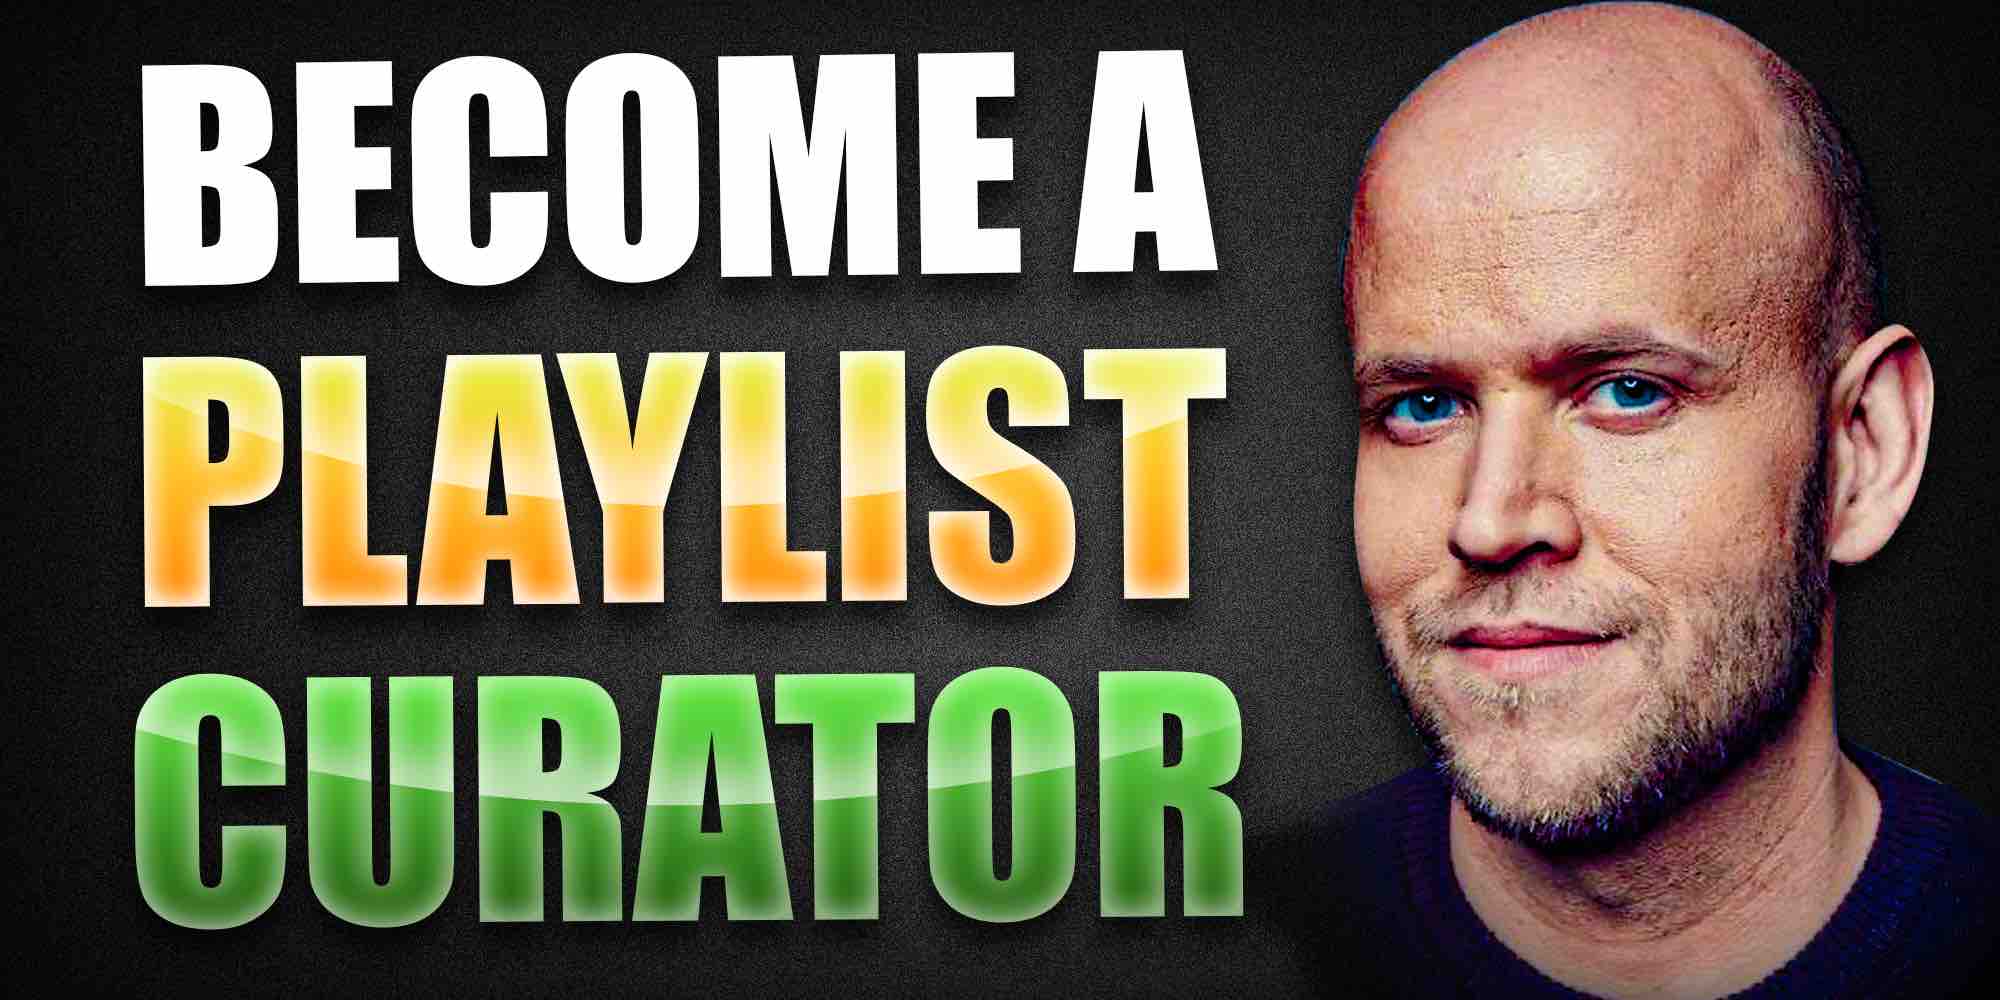 What Does A Playlist Curator Job Entail?